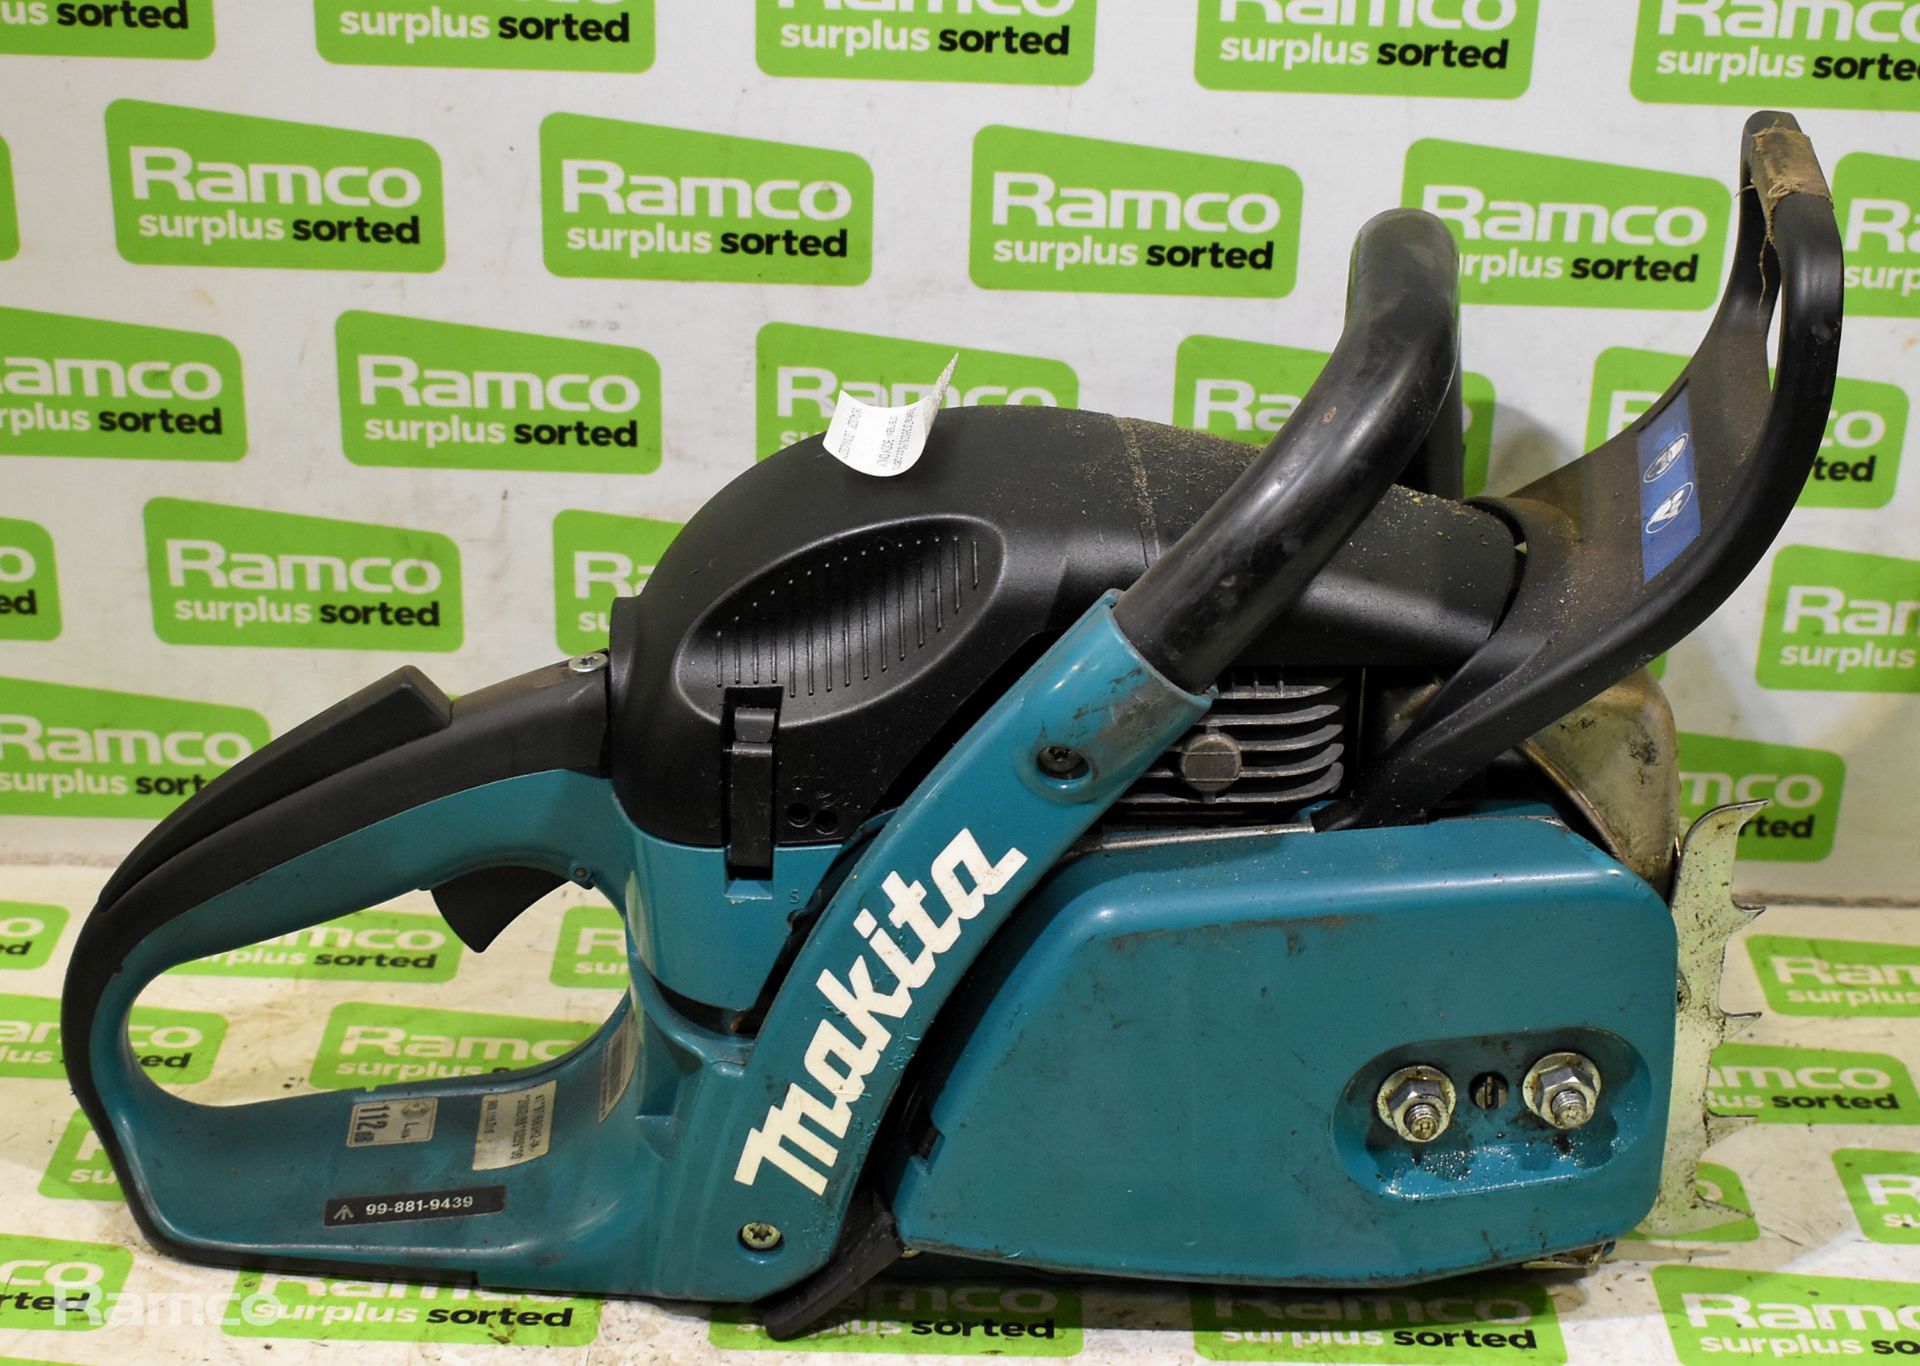 6x Makita DCS5030 50cc petrol chainsaw - BODIES ONLY - AS SPARES & REPAIRS - Image 9 of 33